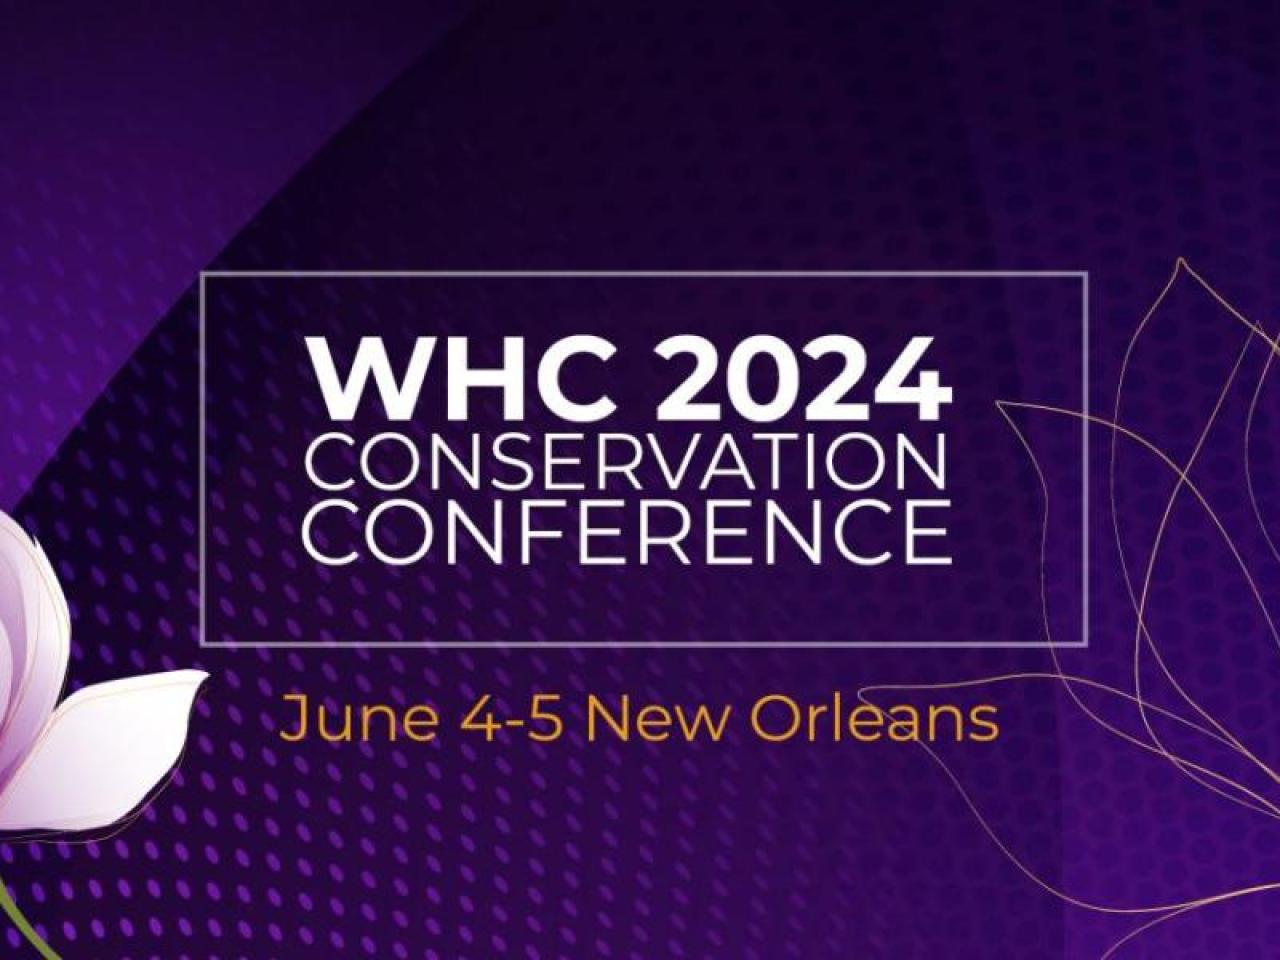 WHC 2024 Conservation Conference June 4-5 New Orleans